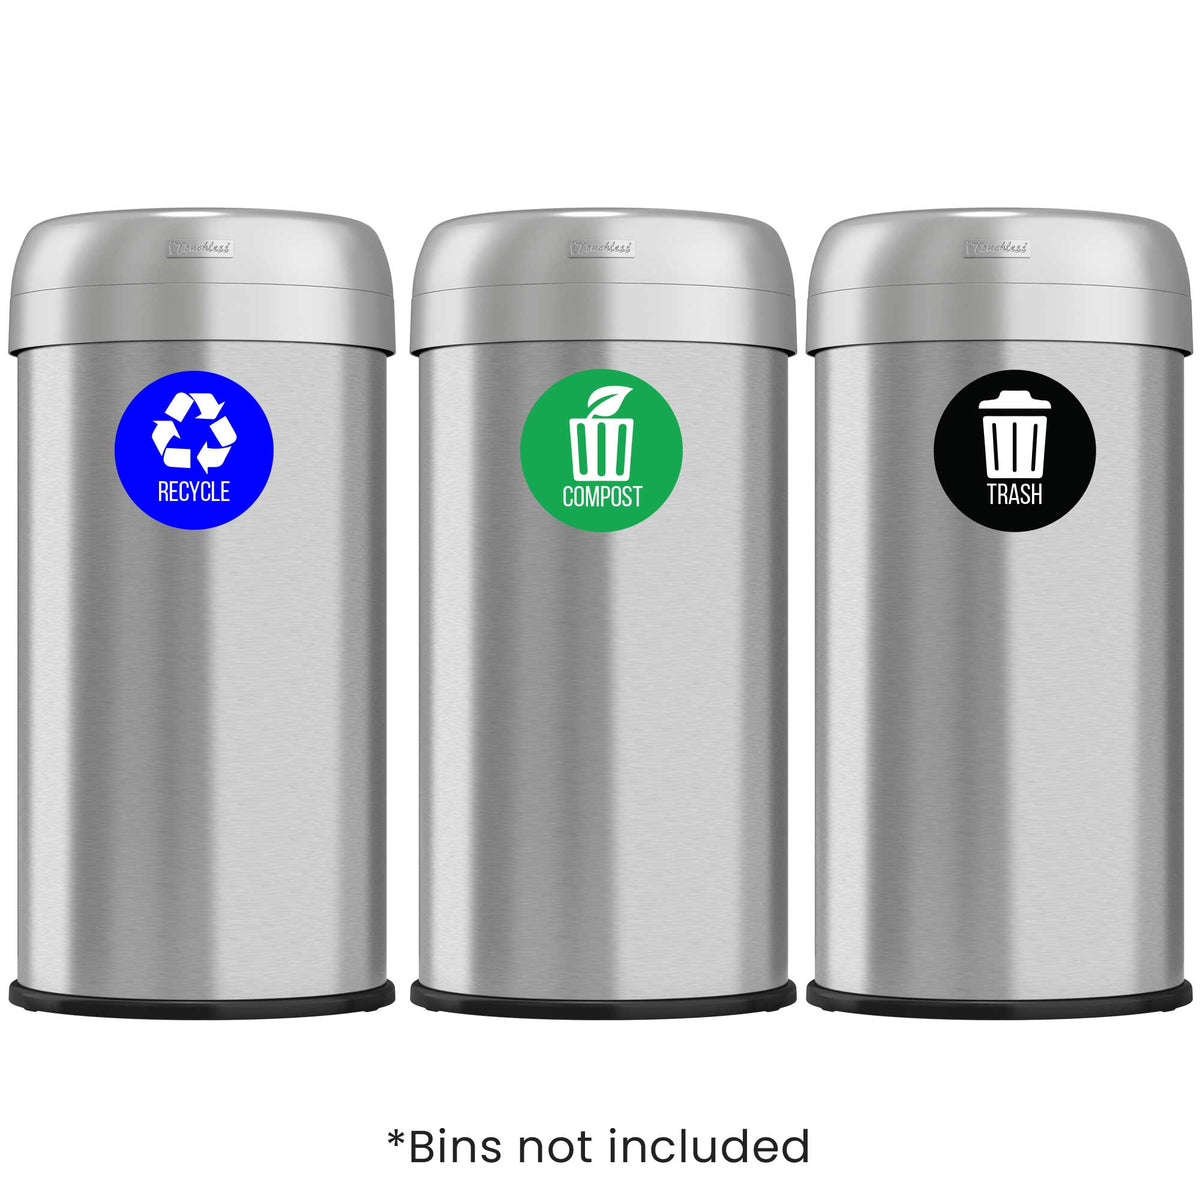 iTouchless Trash, Recycle, and Compost Vinyl Sticker Set. Bins not included.